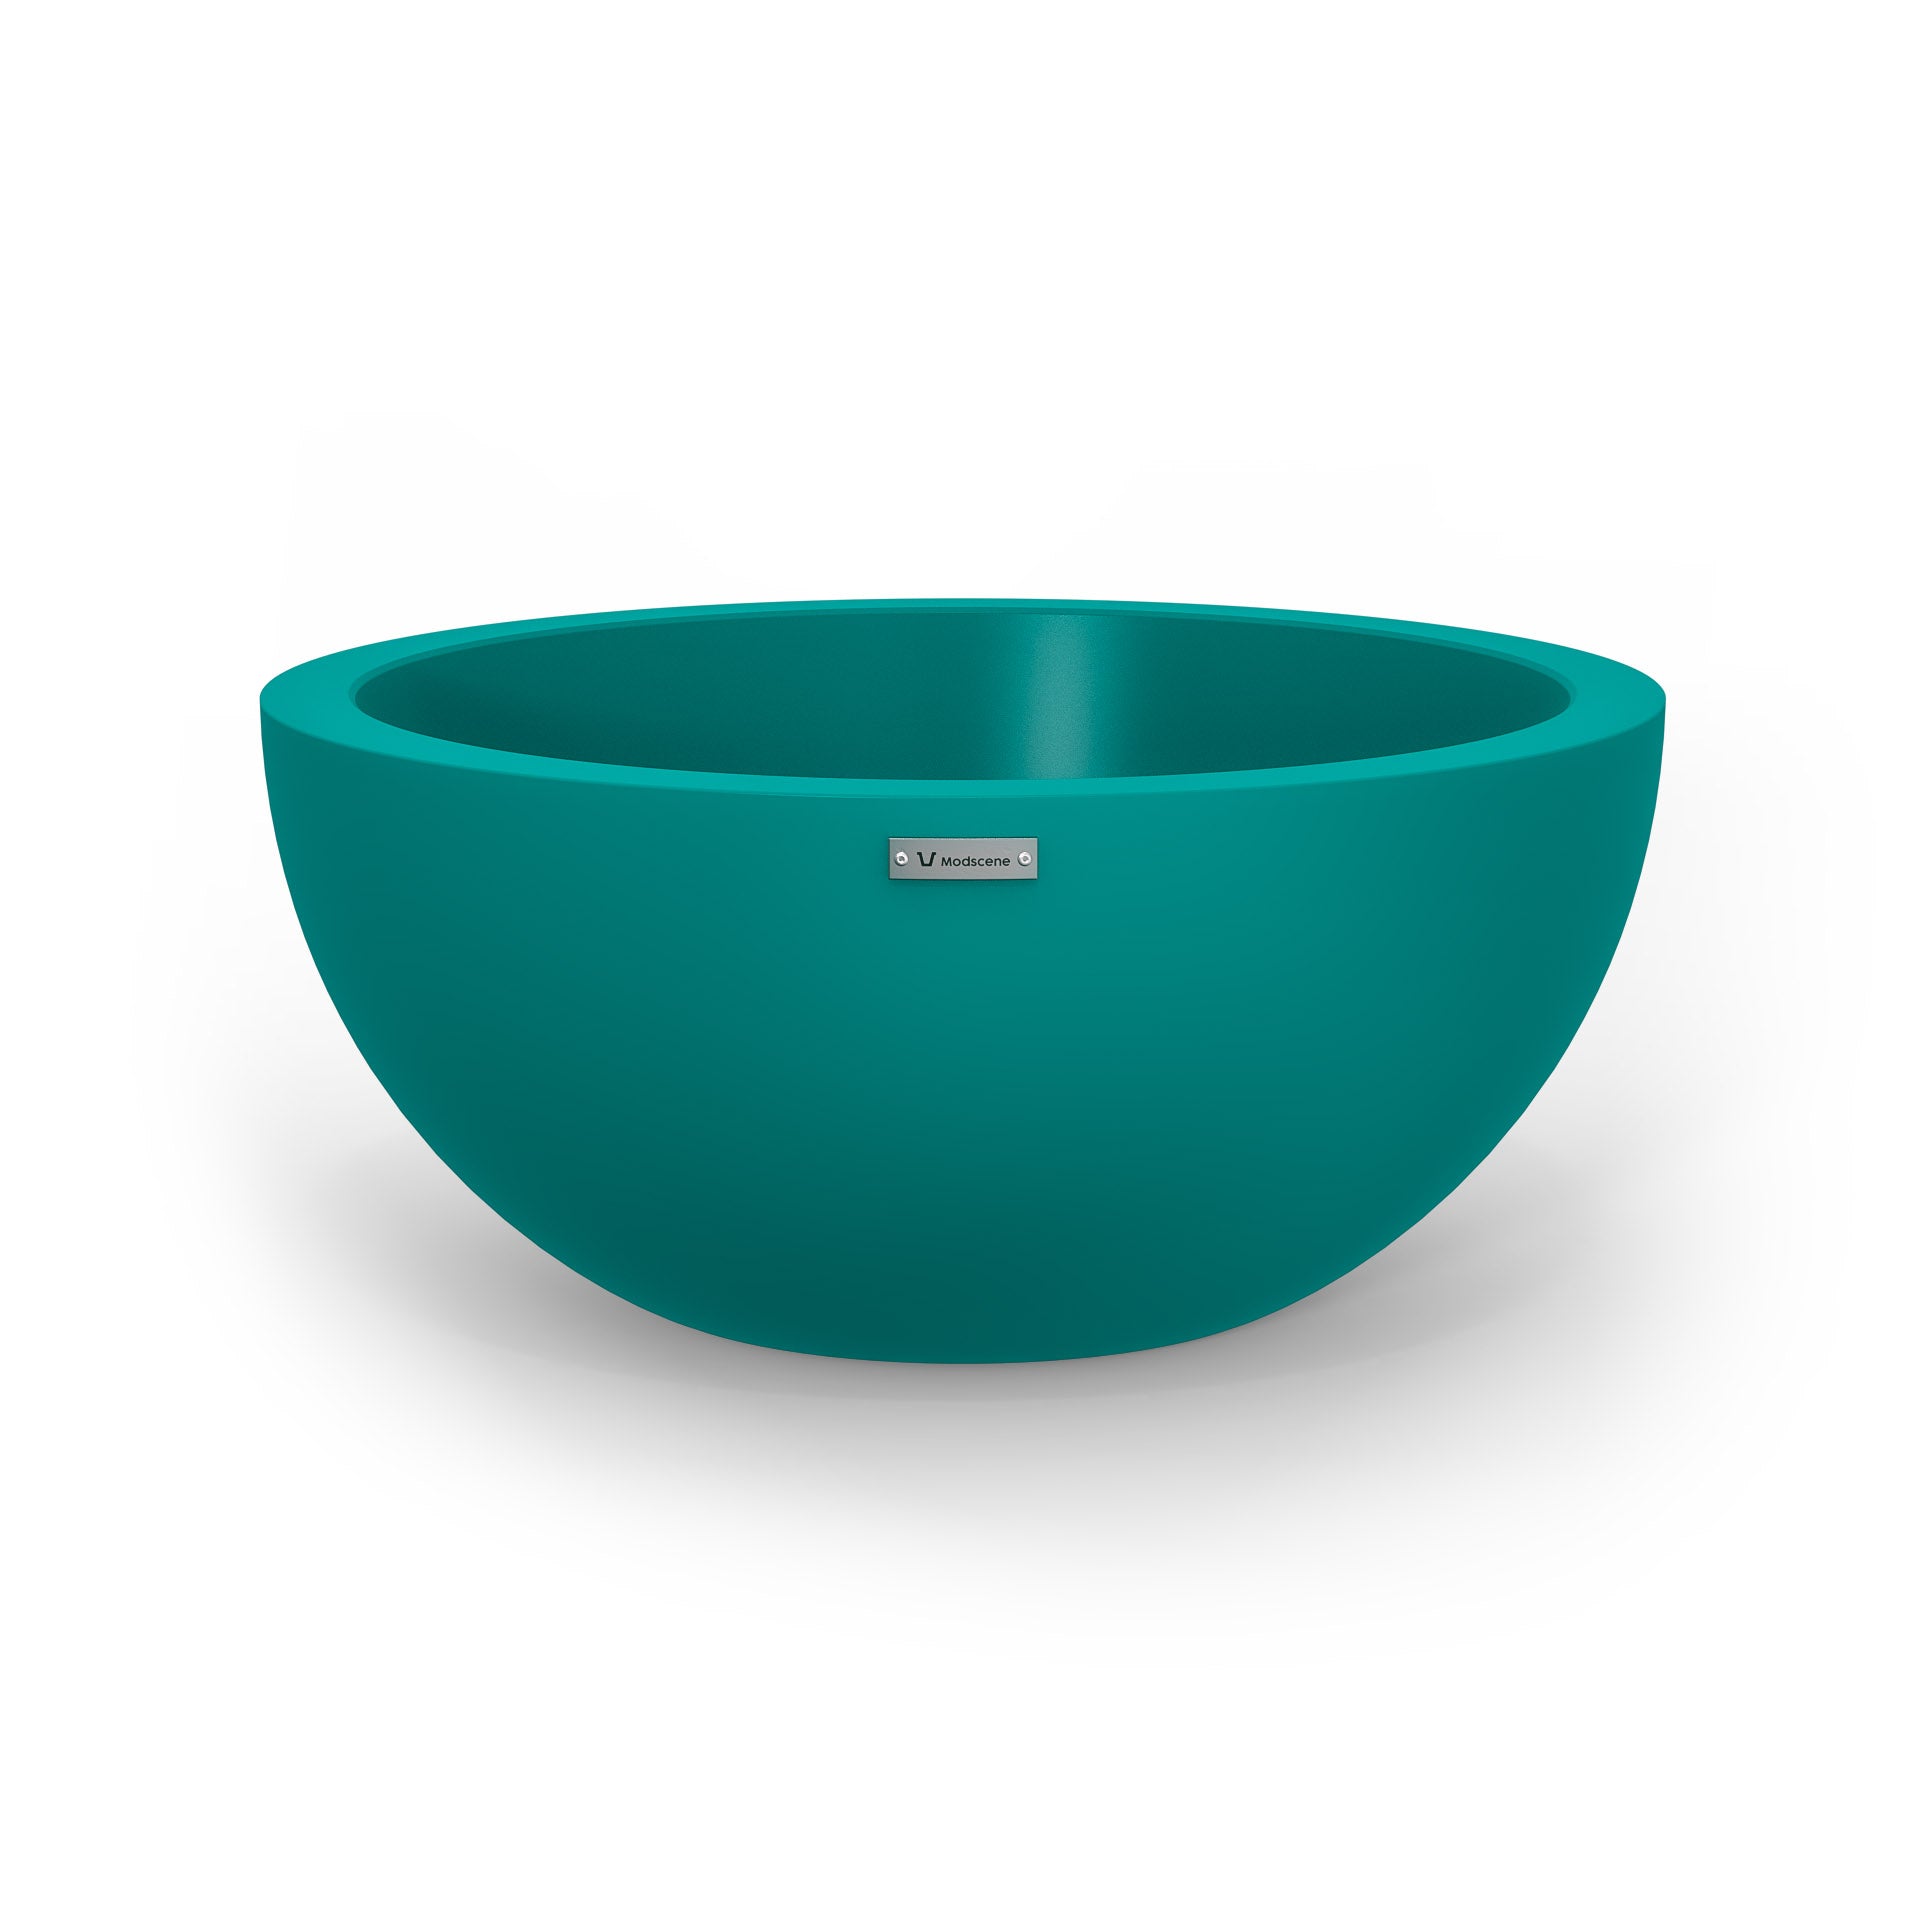 A large planter bowl in a teal blue colour made by Modscene. Australian planters.